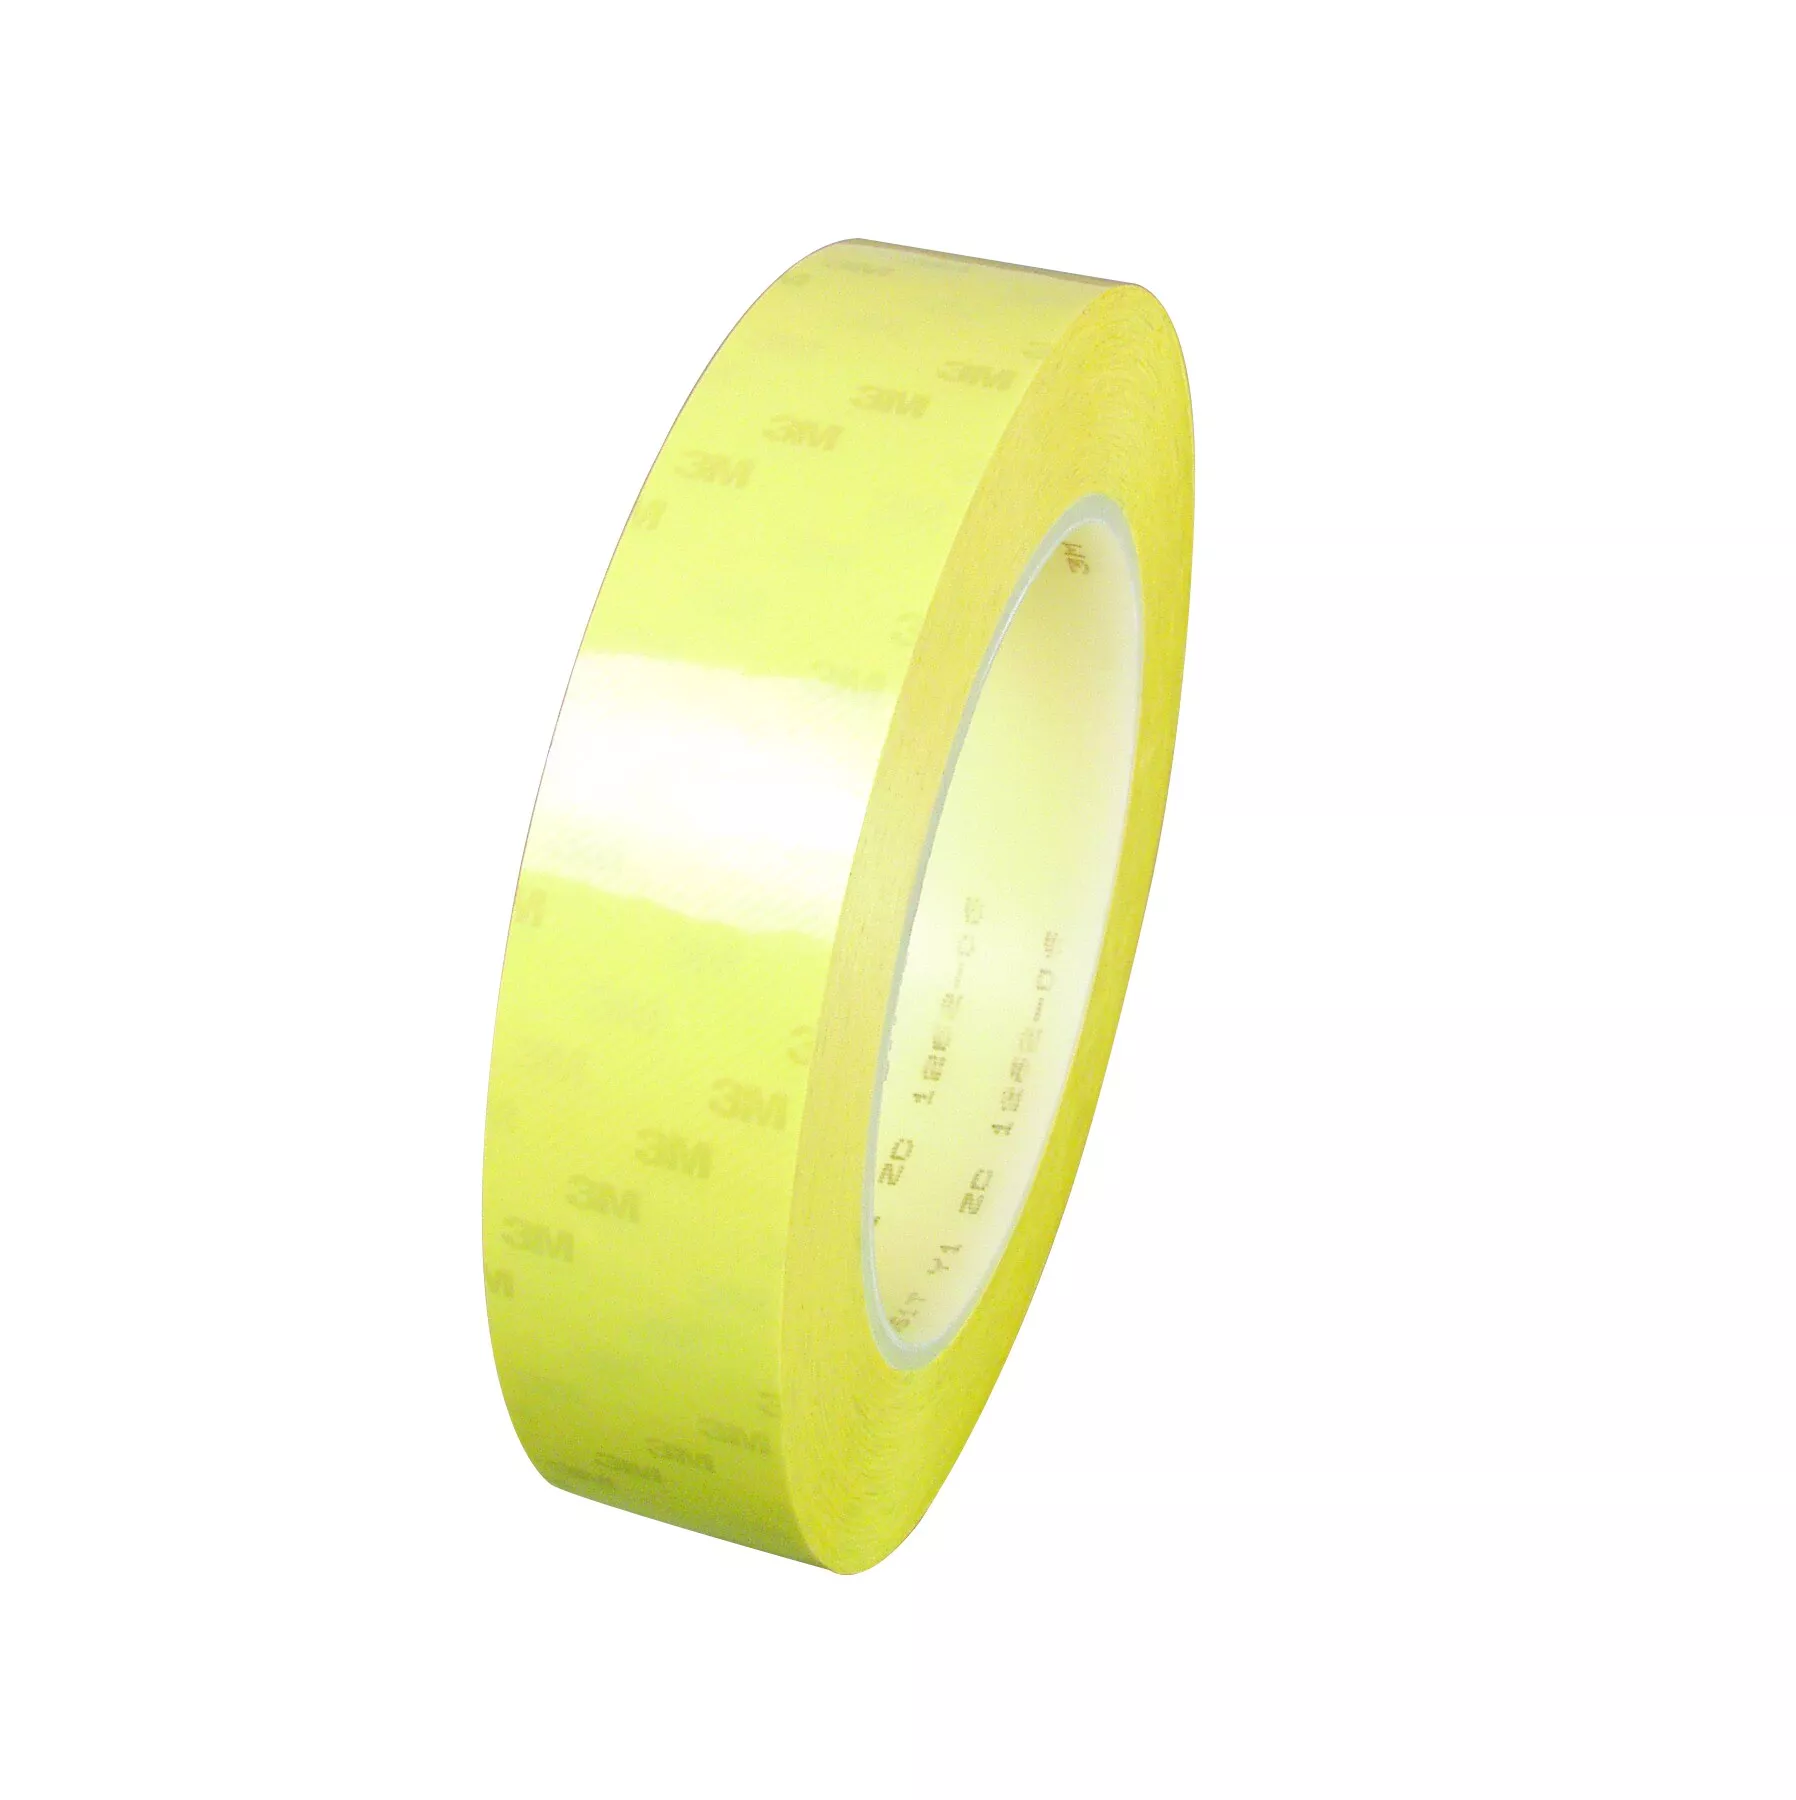 SKU 7000133148 | 3M™ Polyester Film Electrical Tape 56